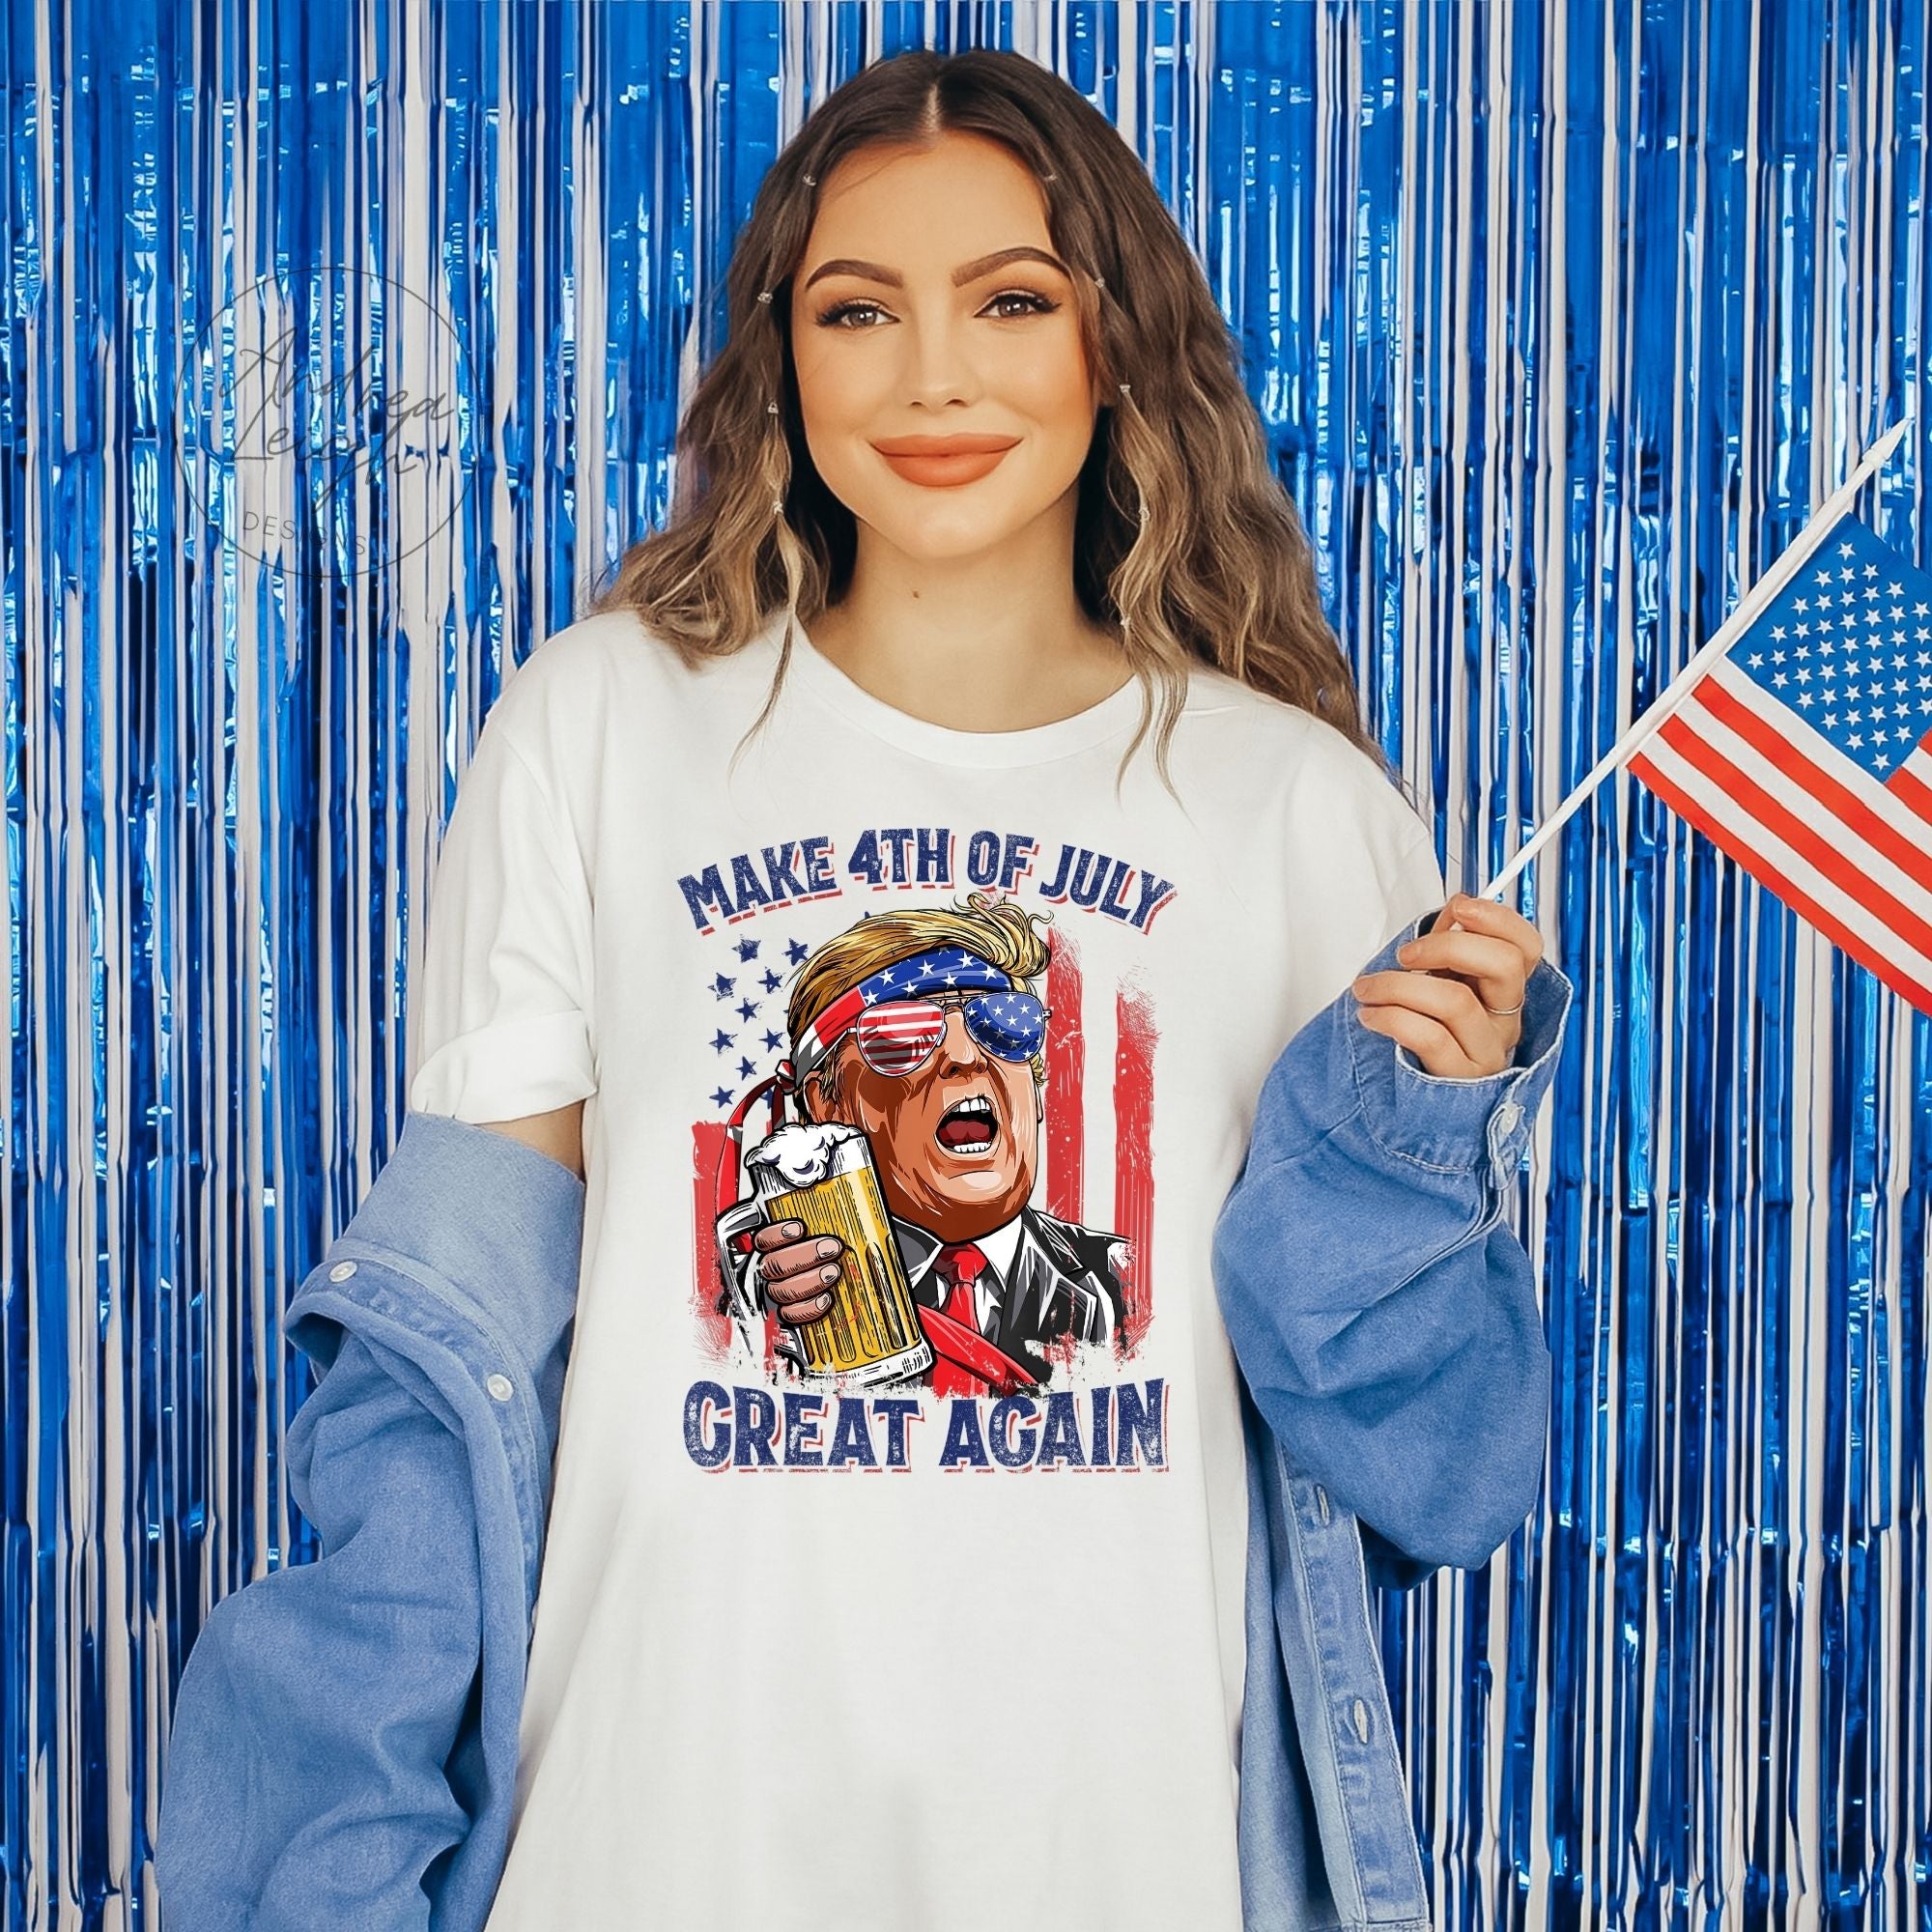 Make 4th of July Great Again